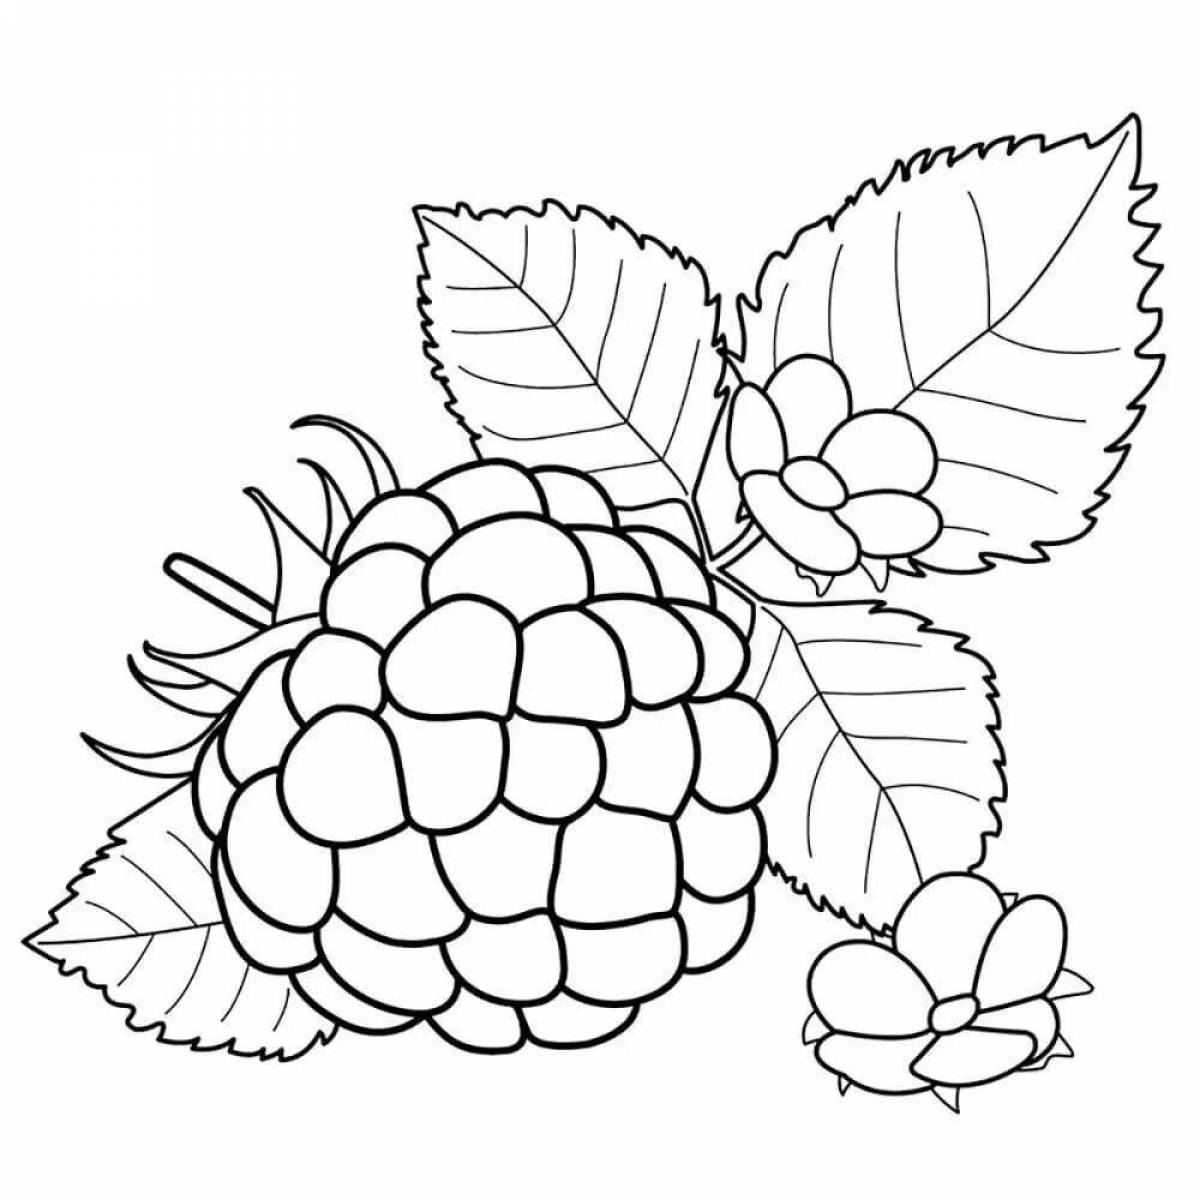 Playful baby cloudberry coloring page